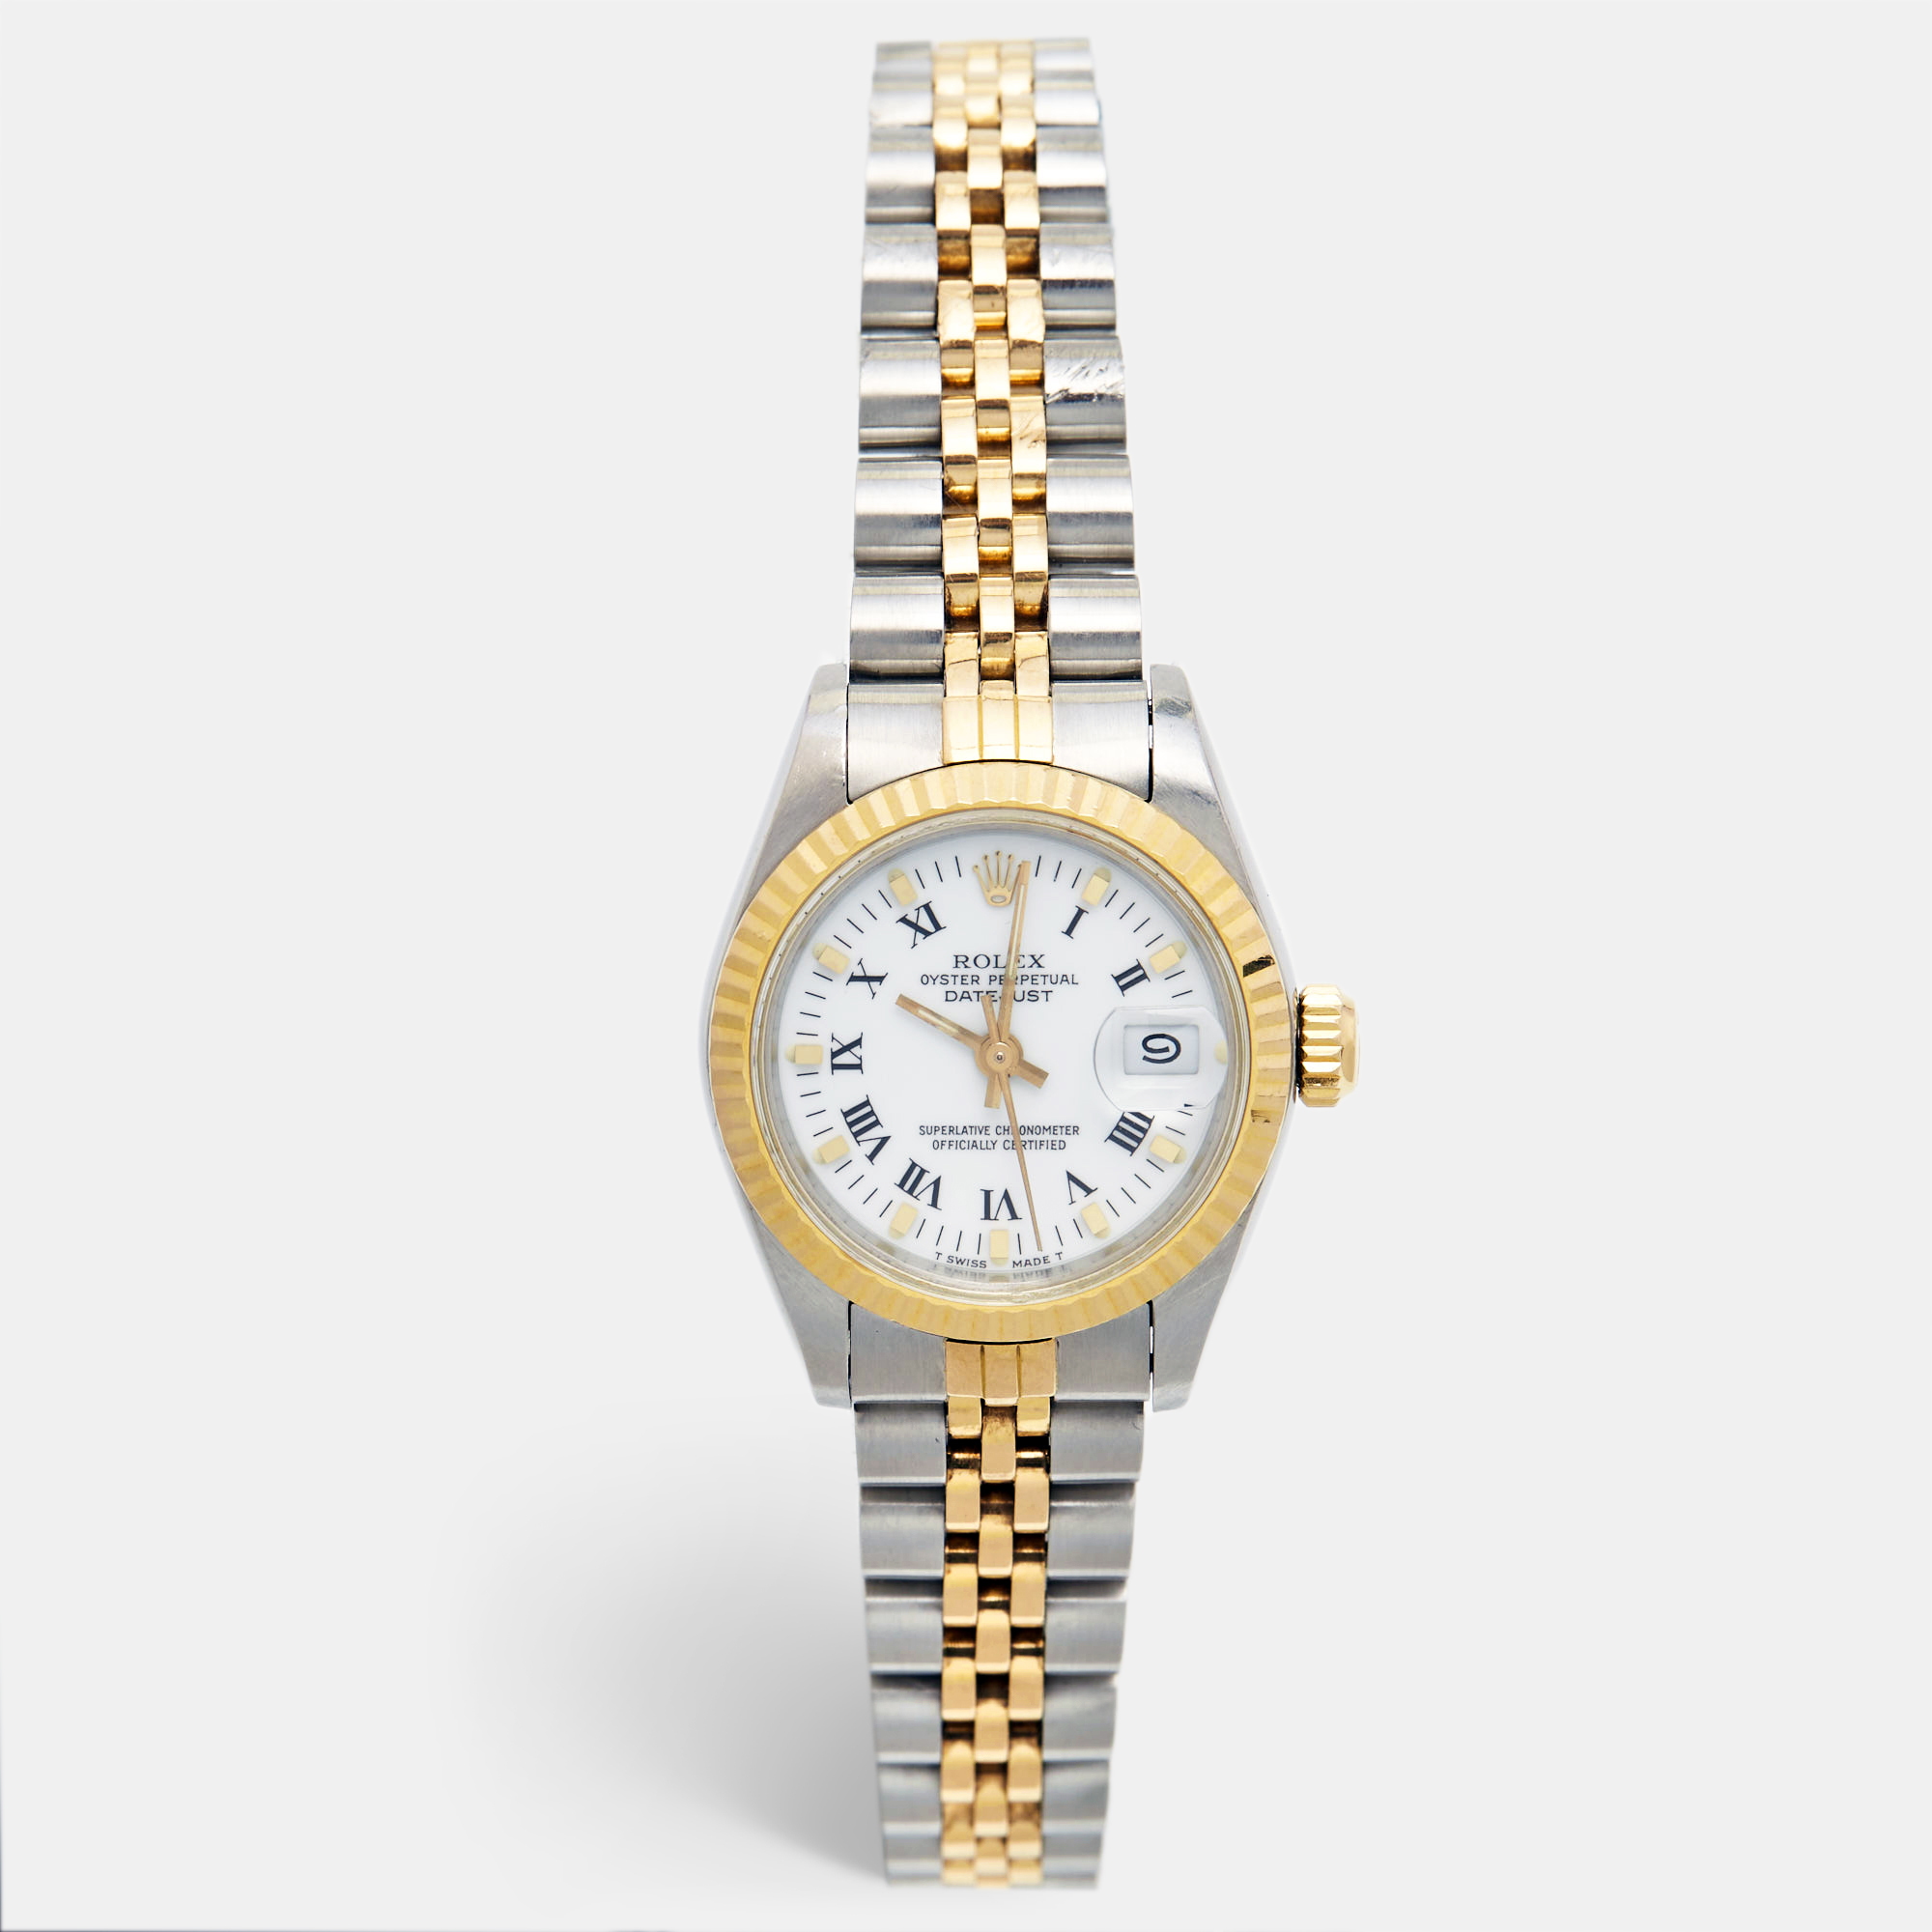 Rolex white 18k yellow gold and stainless steel datejust 69173 women's wristwatch 26 mm